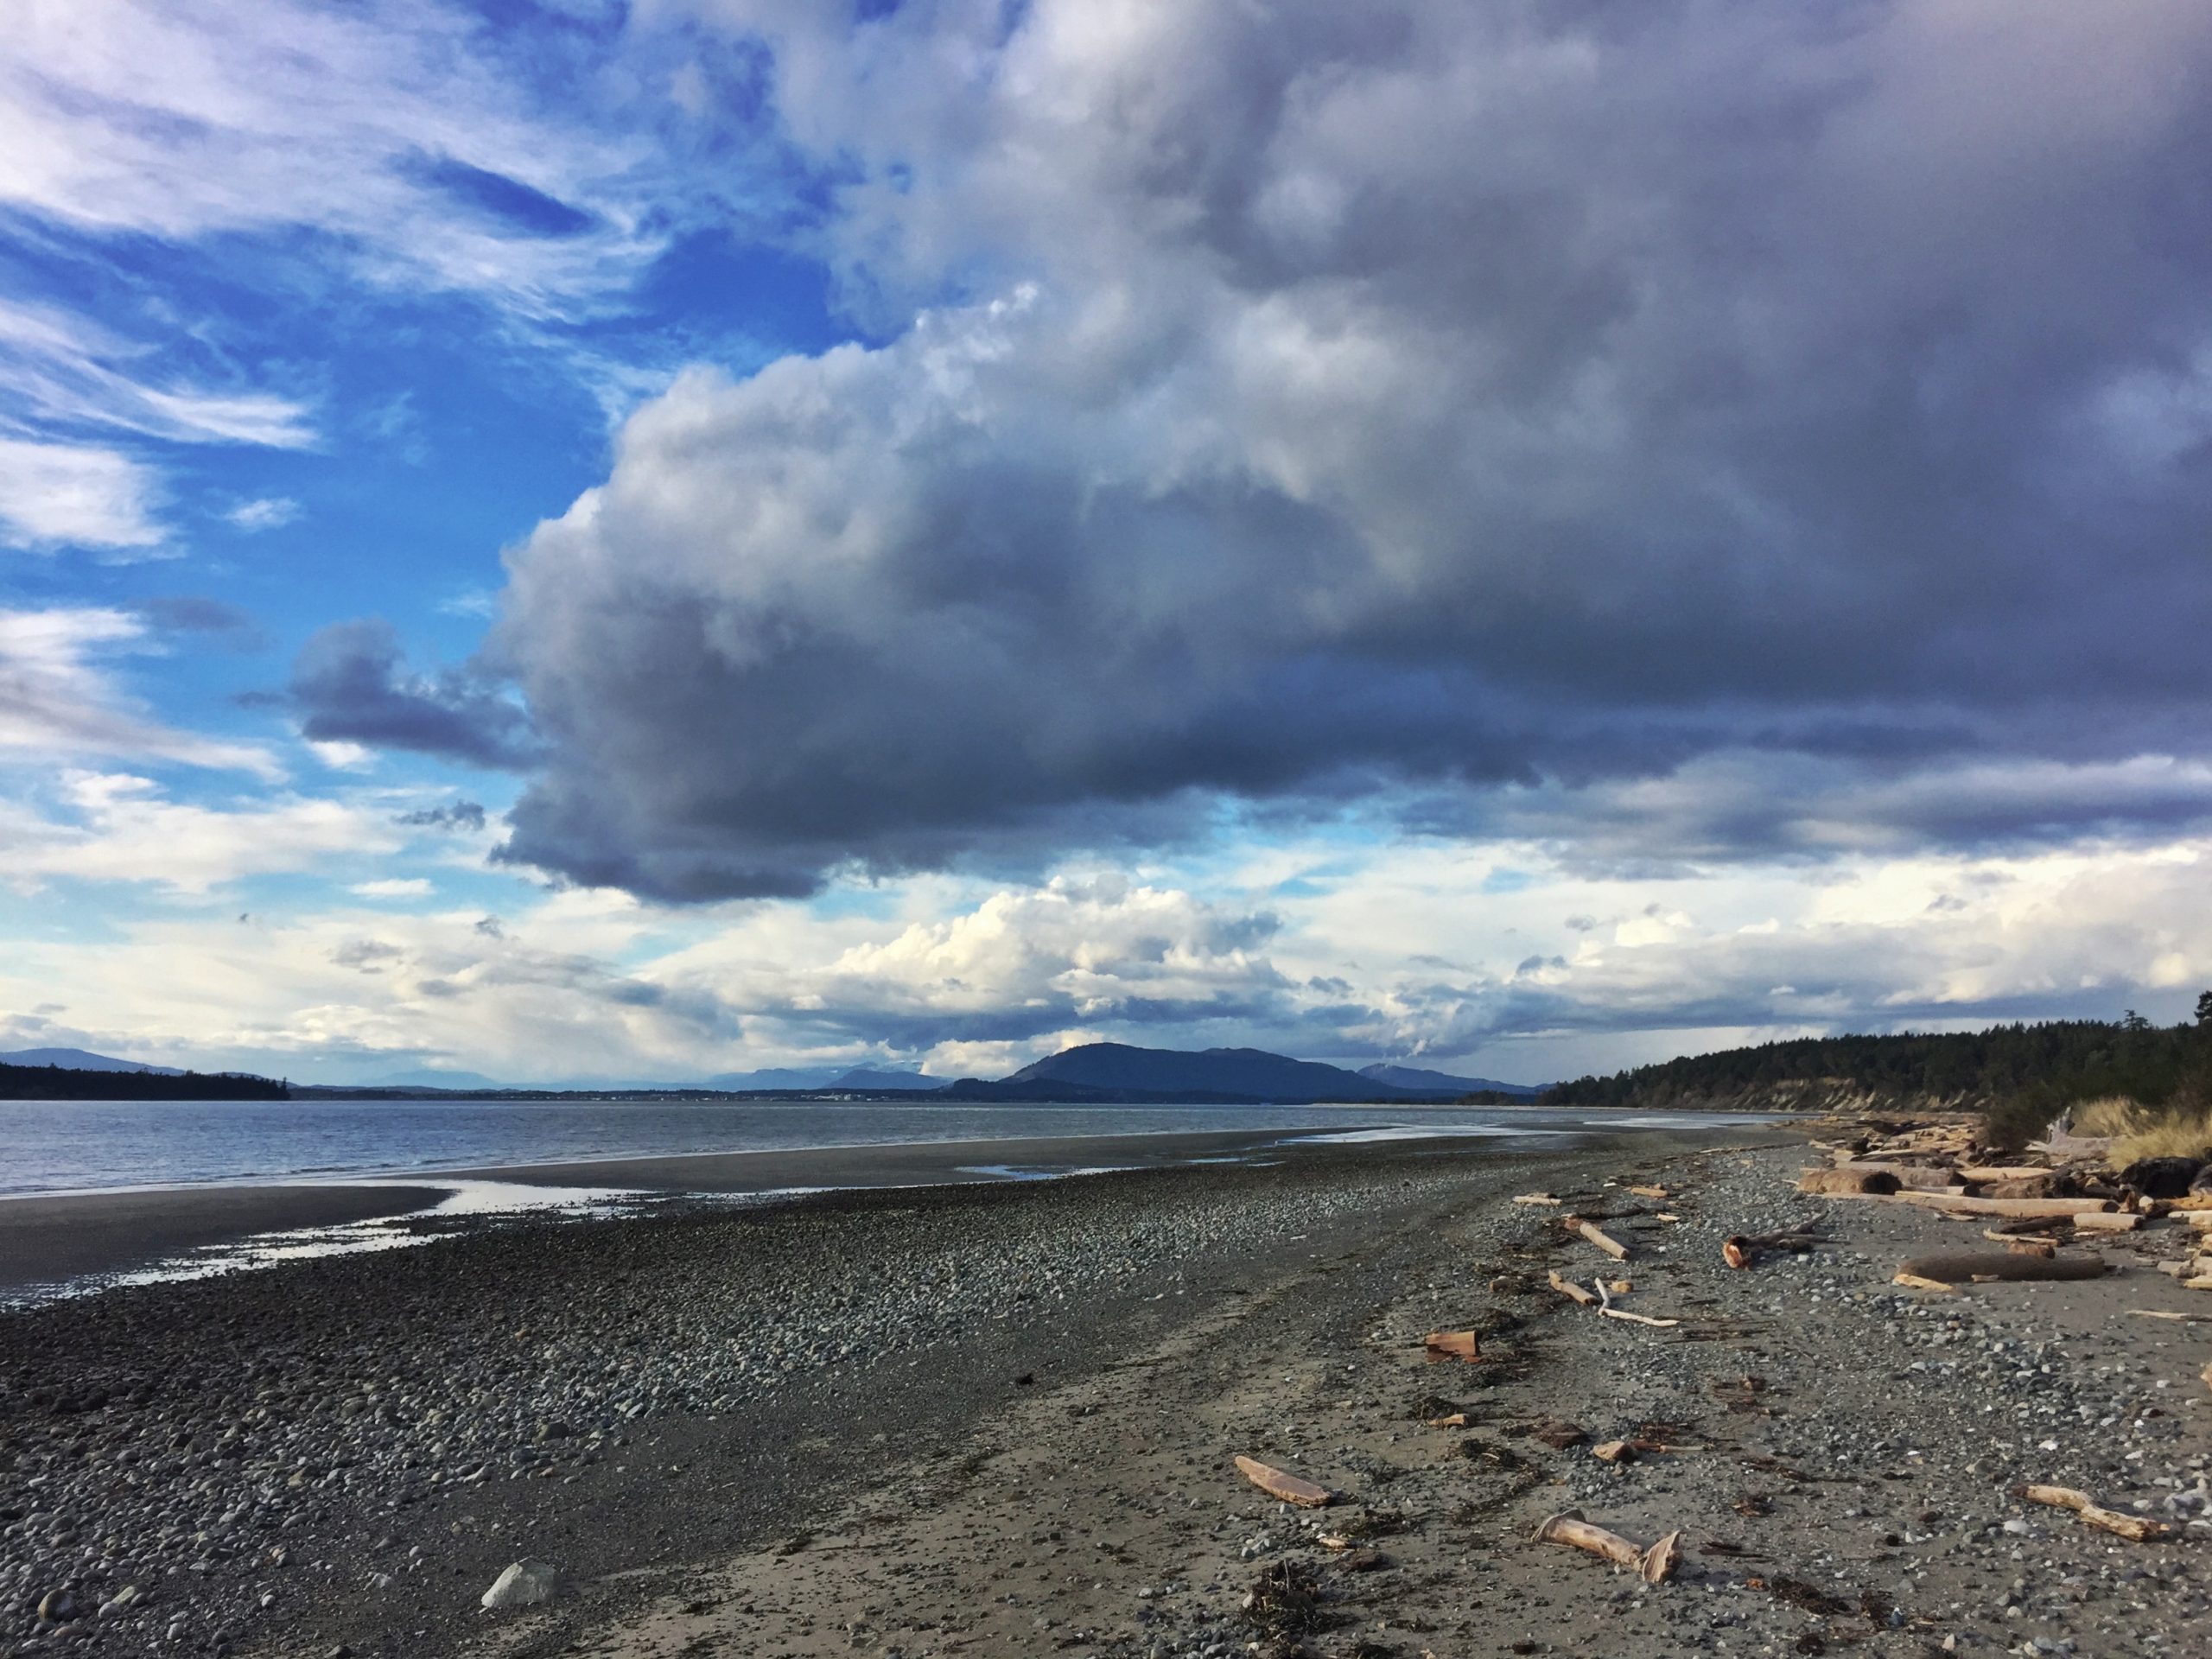 Photo depicts the coast of Sidney Island in the Southern Gulf Islands of British Columbia's Pacific Coast. The ocean meets a sandy beach covered in driftwood while overhead stormy clouds roll in.